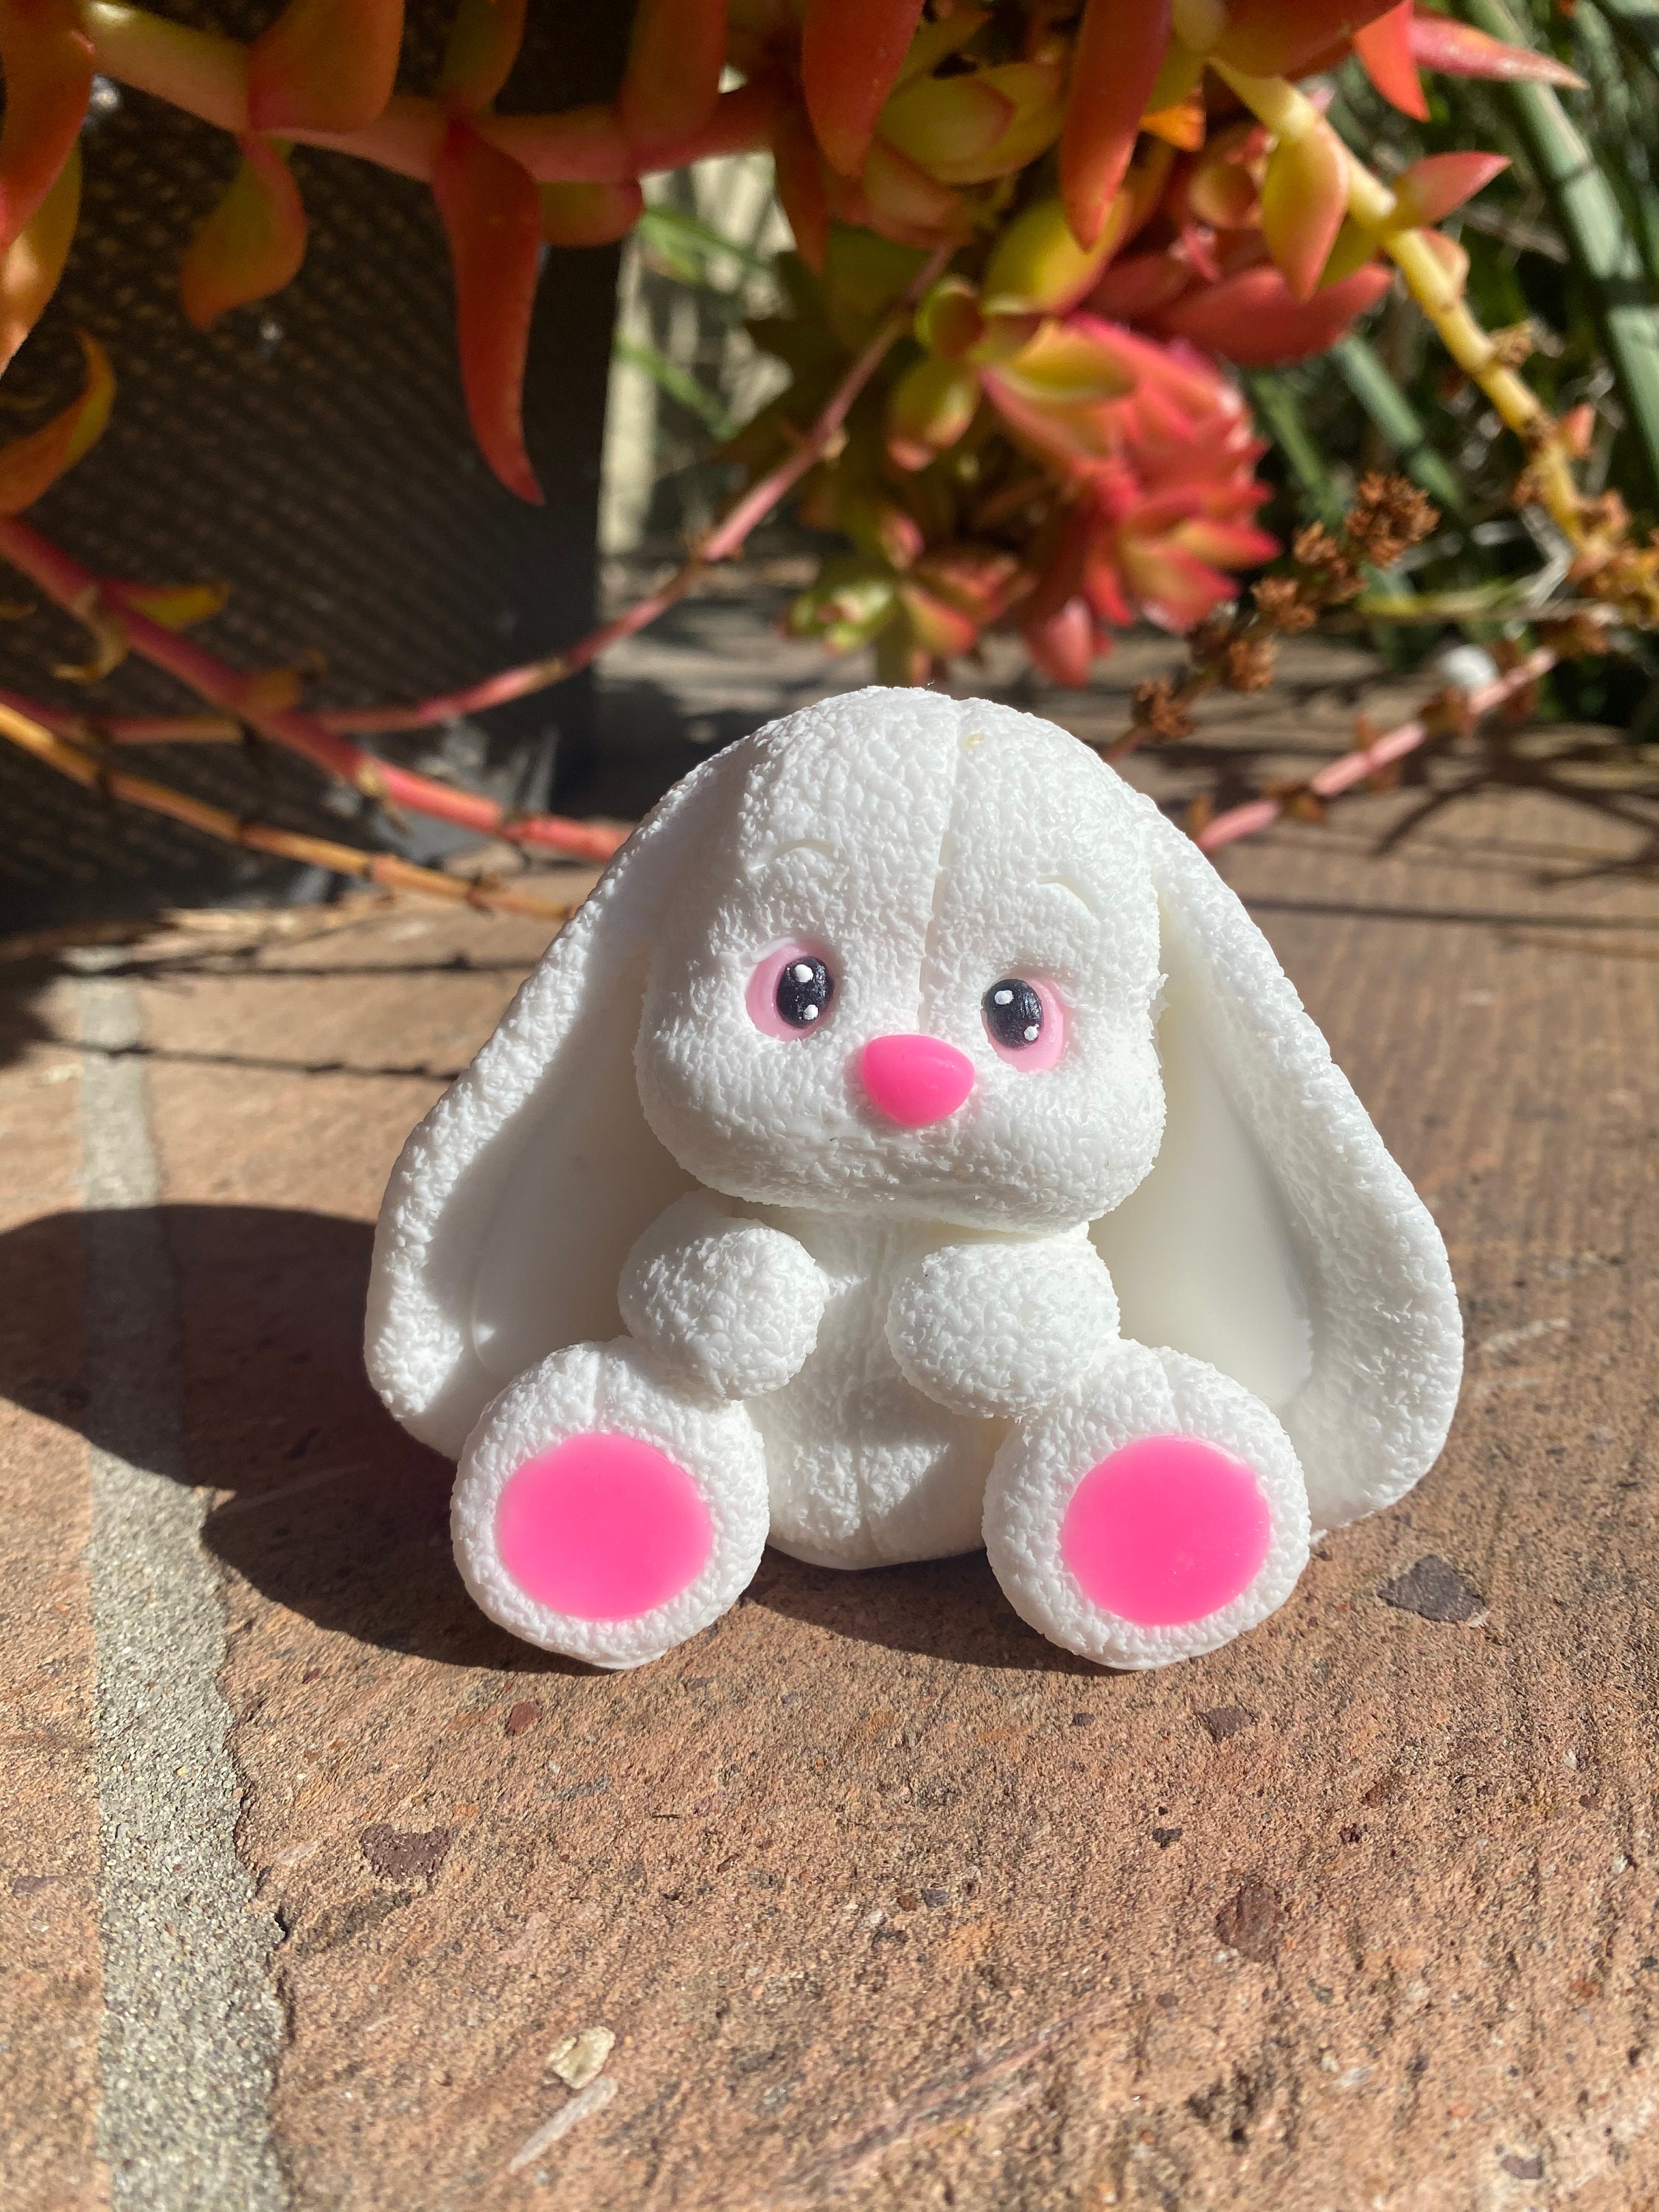 Cakesicle Mold: Easter Bunny